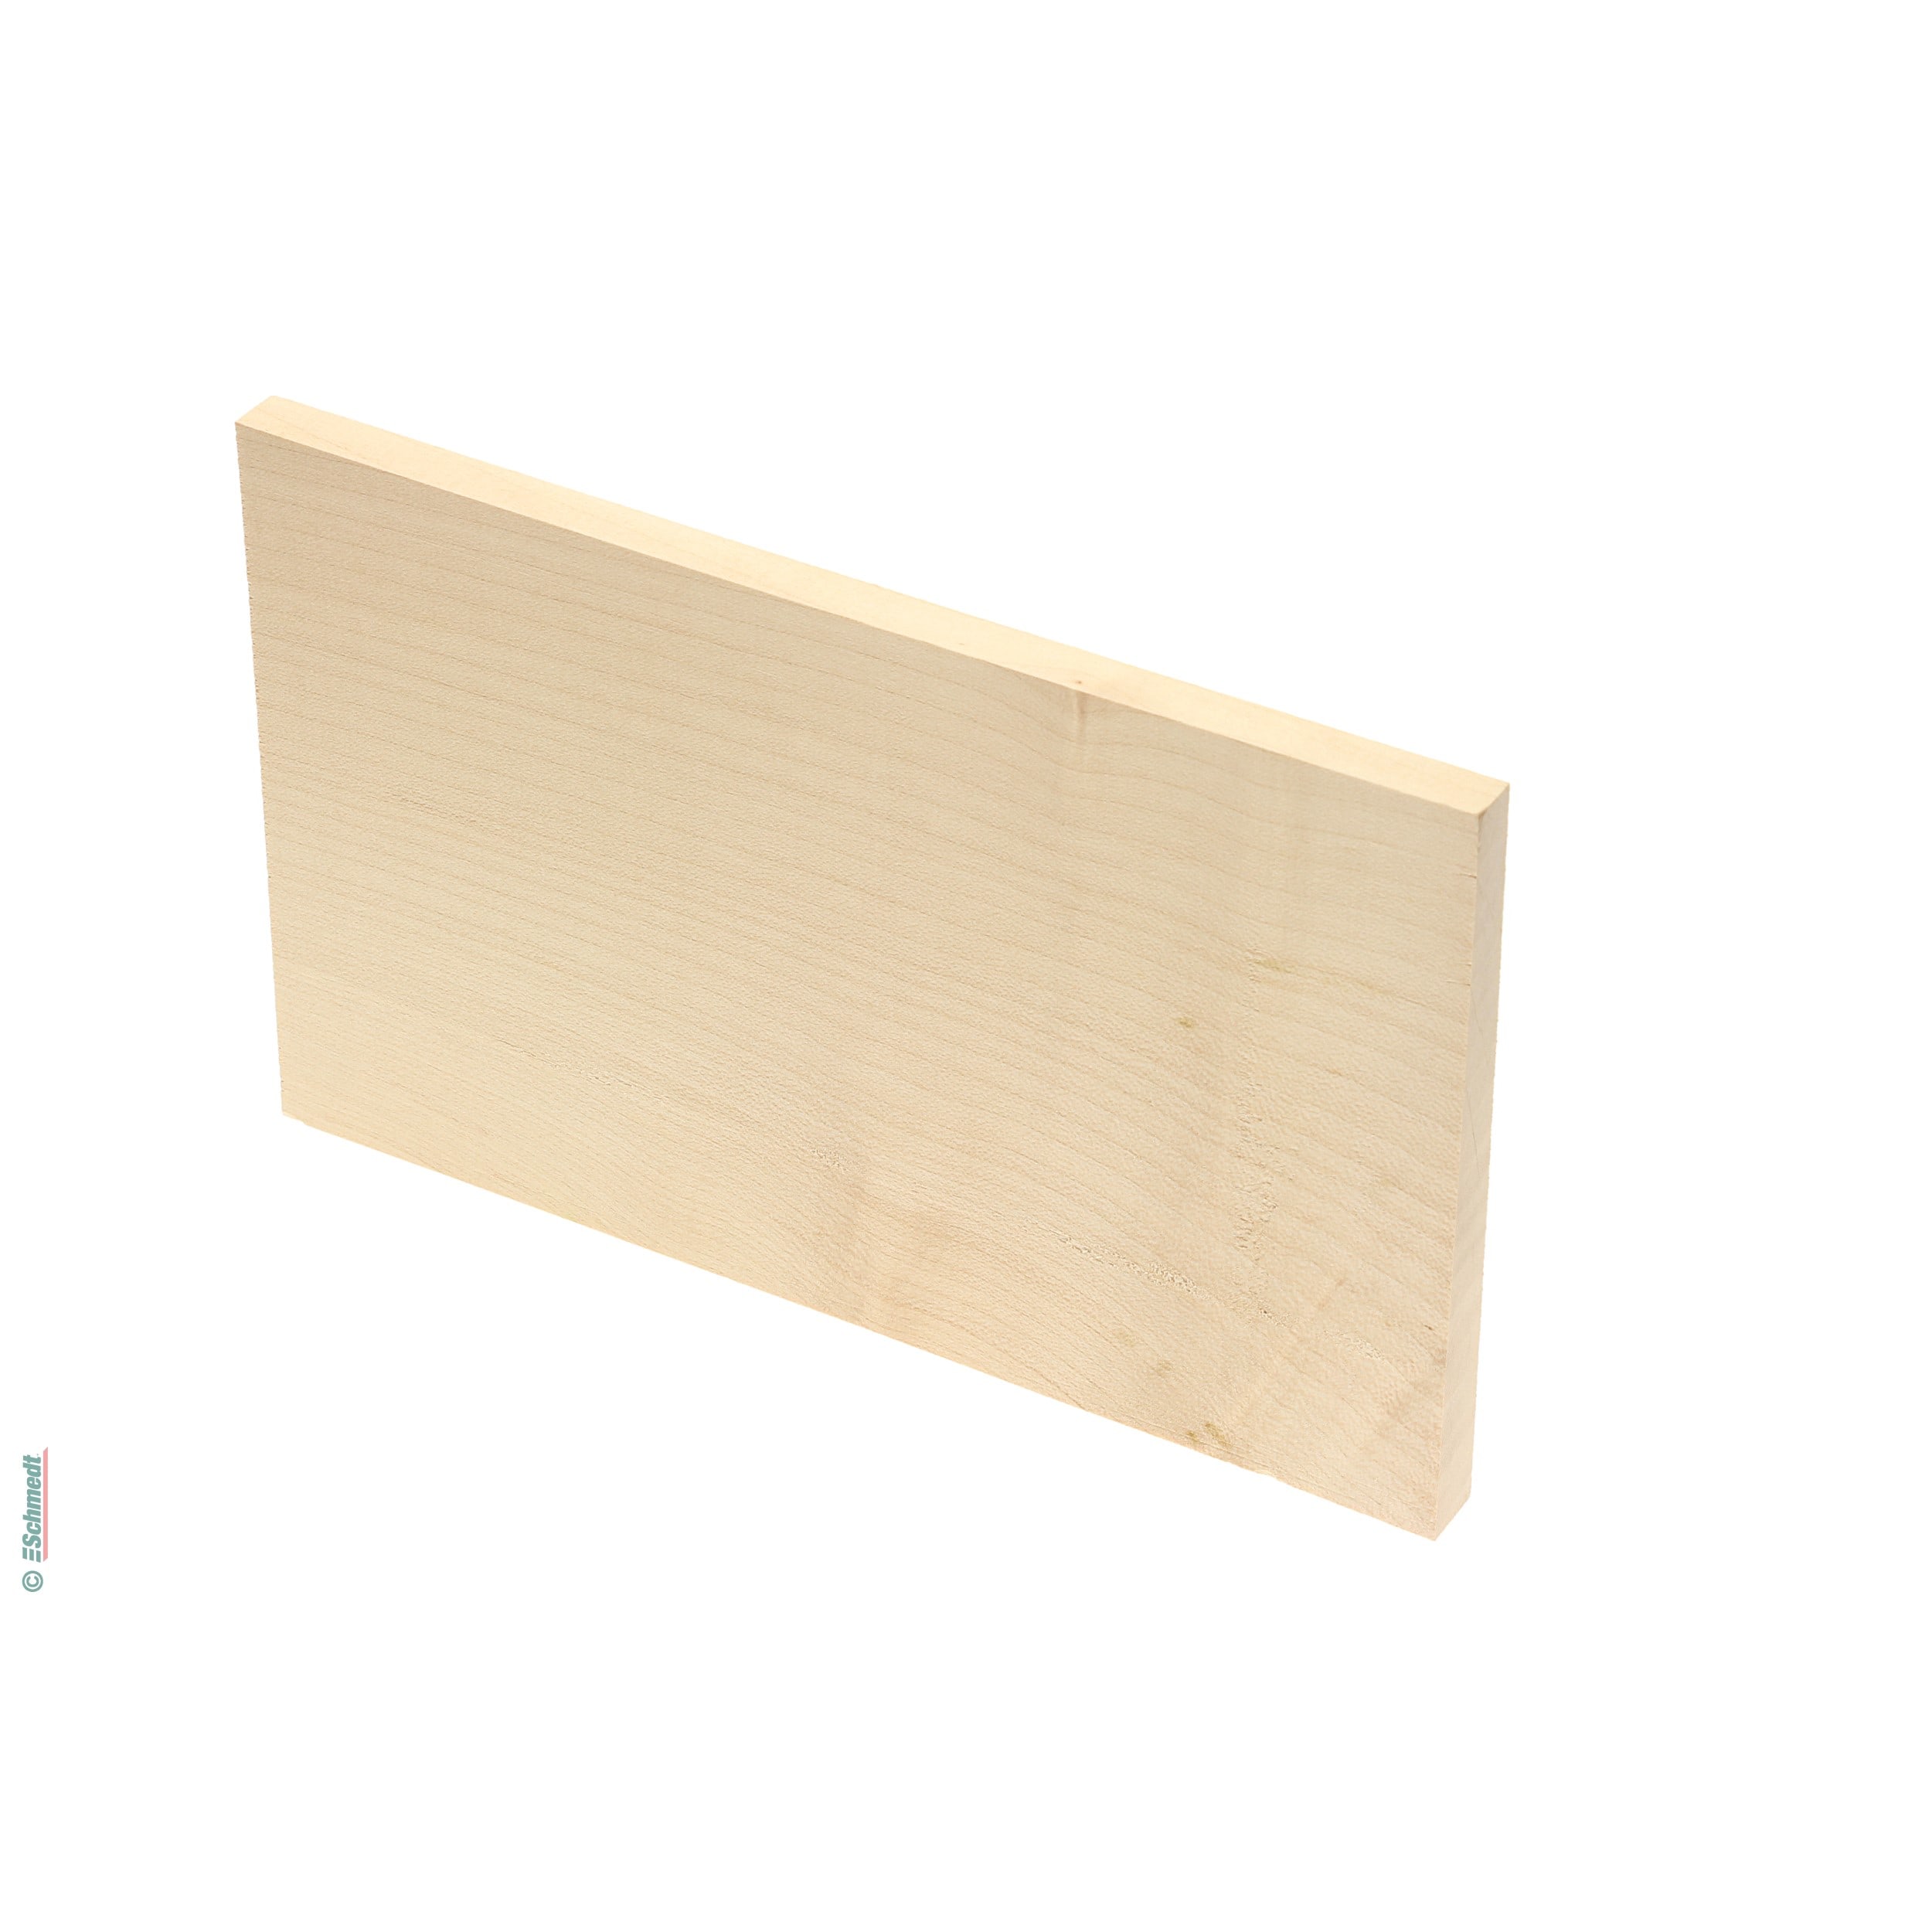 Pressing board for edge-gilding - Dimensions 240 x 150 mm - These special bevelled pressing boards, are clamped e.g. in a double-screw edge-...